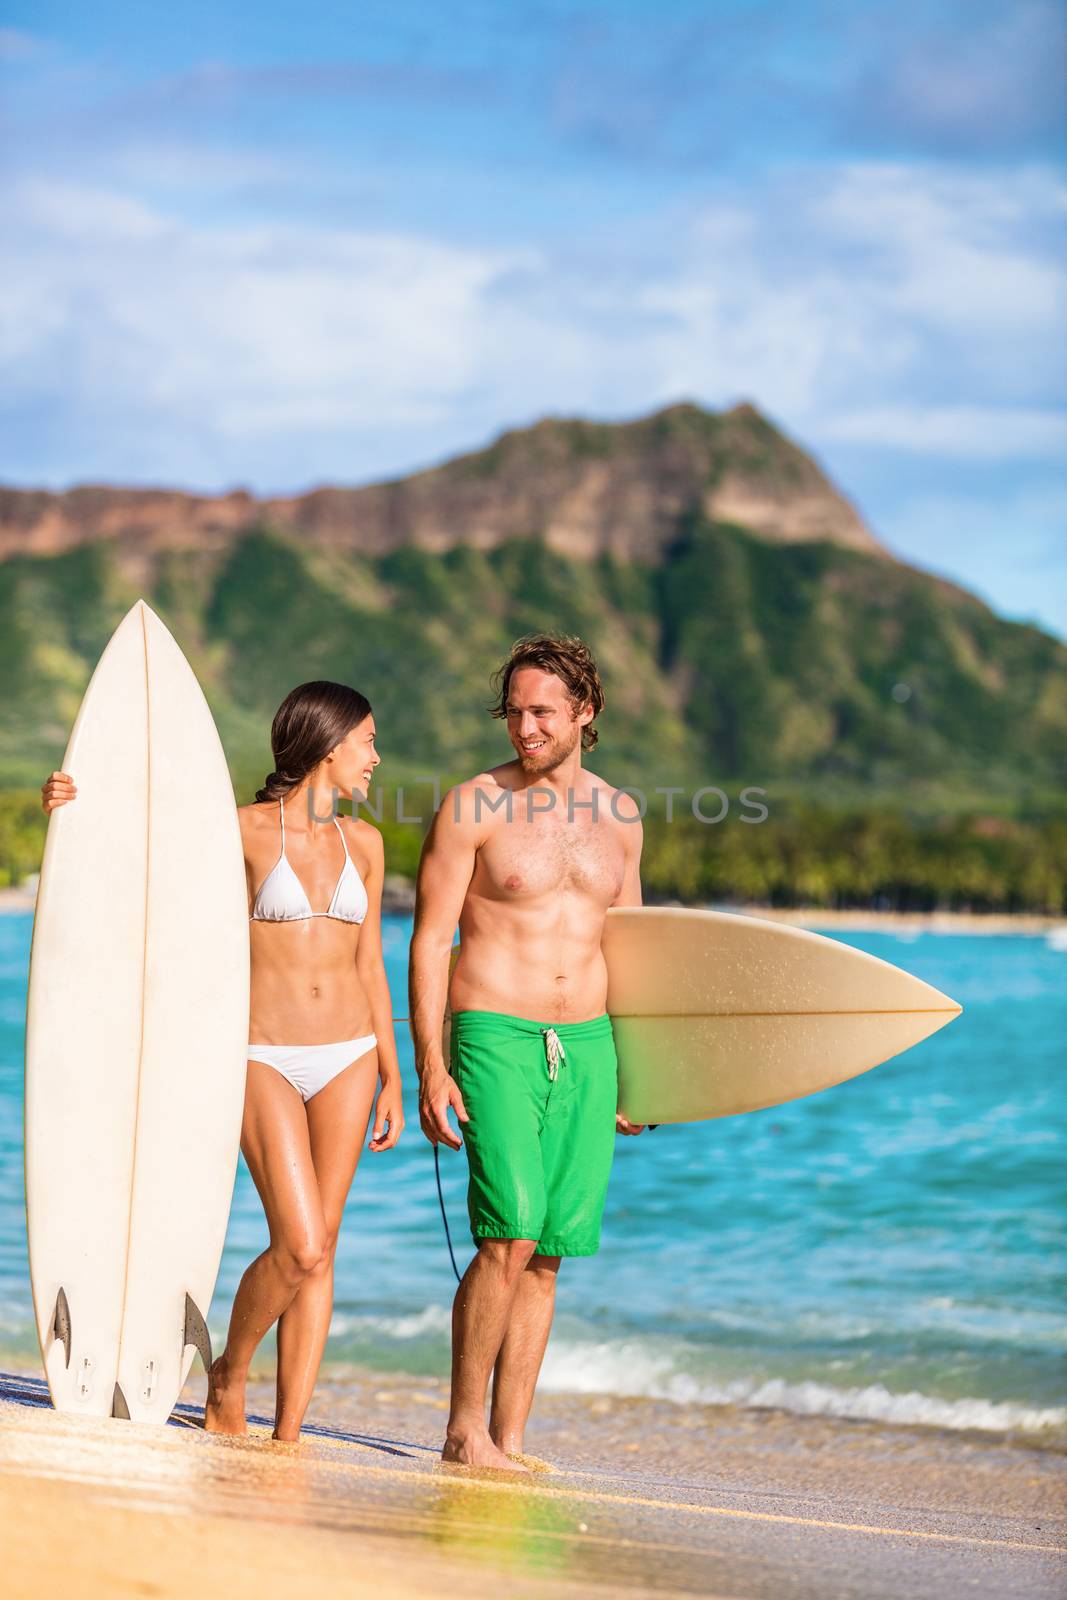 Beach couple surfing in Hawaii relaxing at sunset standing with surfboards on waikiki beach, Honolulu, Oahu, USA. Summer holidays travel landscape. Happy people having fun.